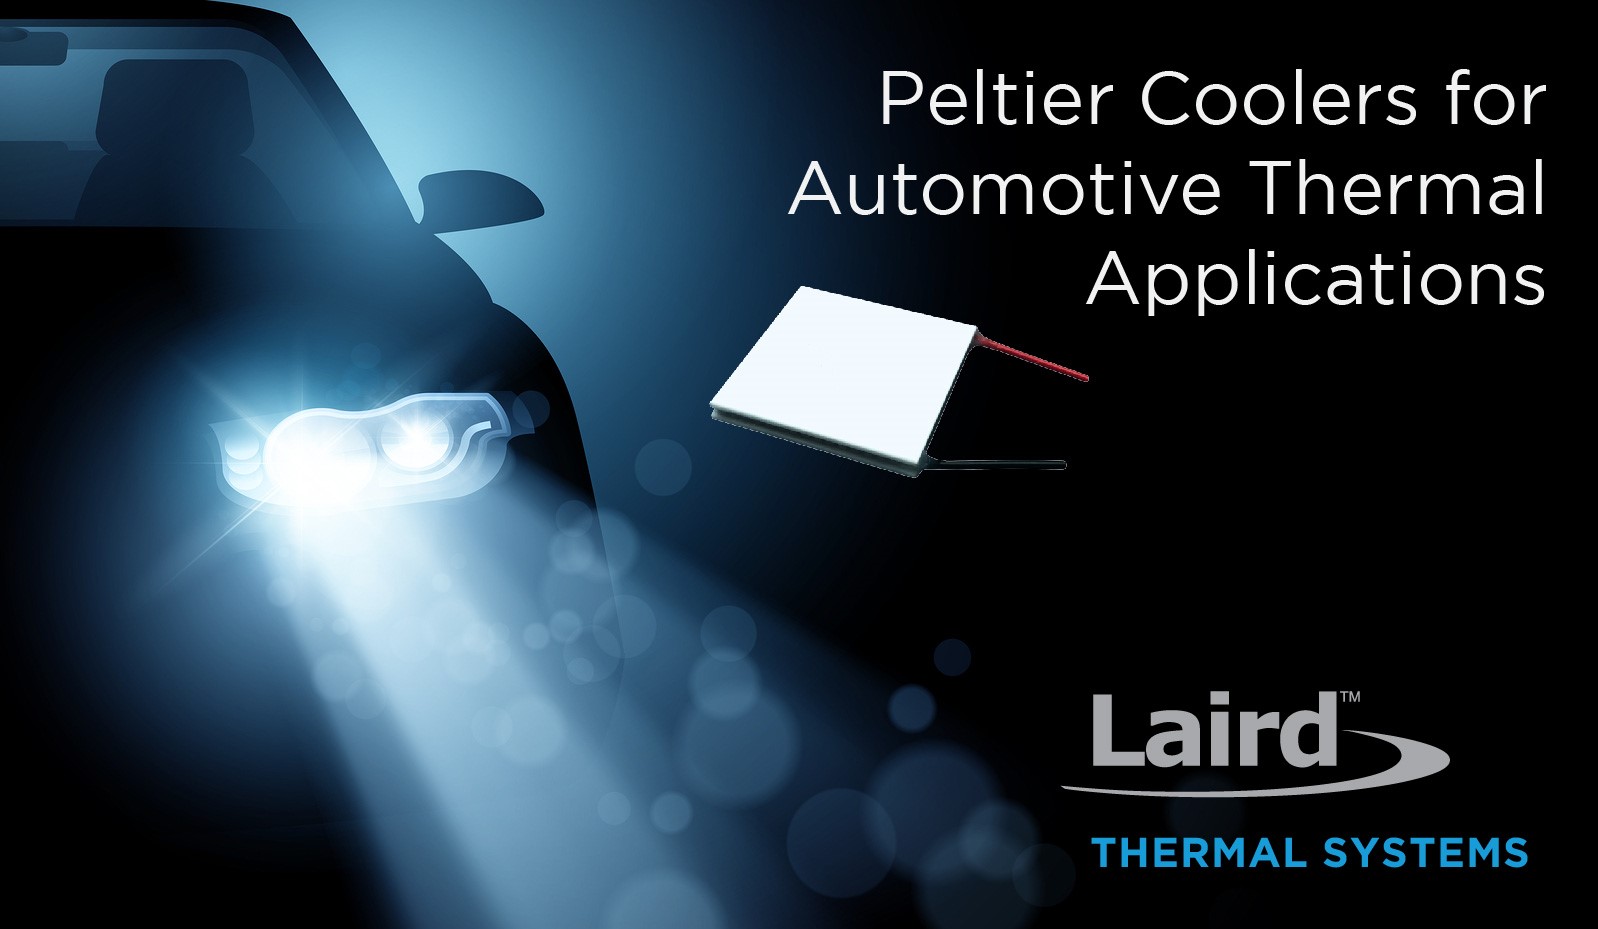 Peltier Coolers Provide Thermal Stability